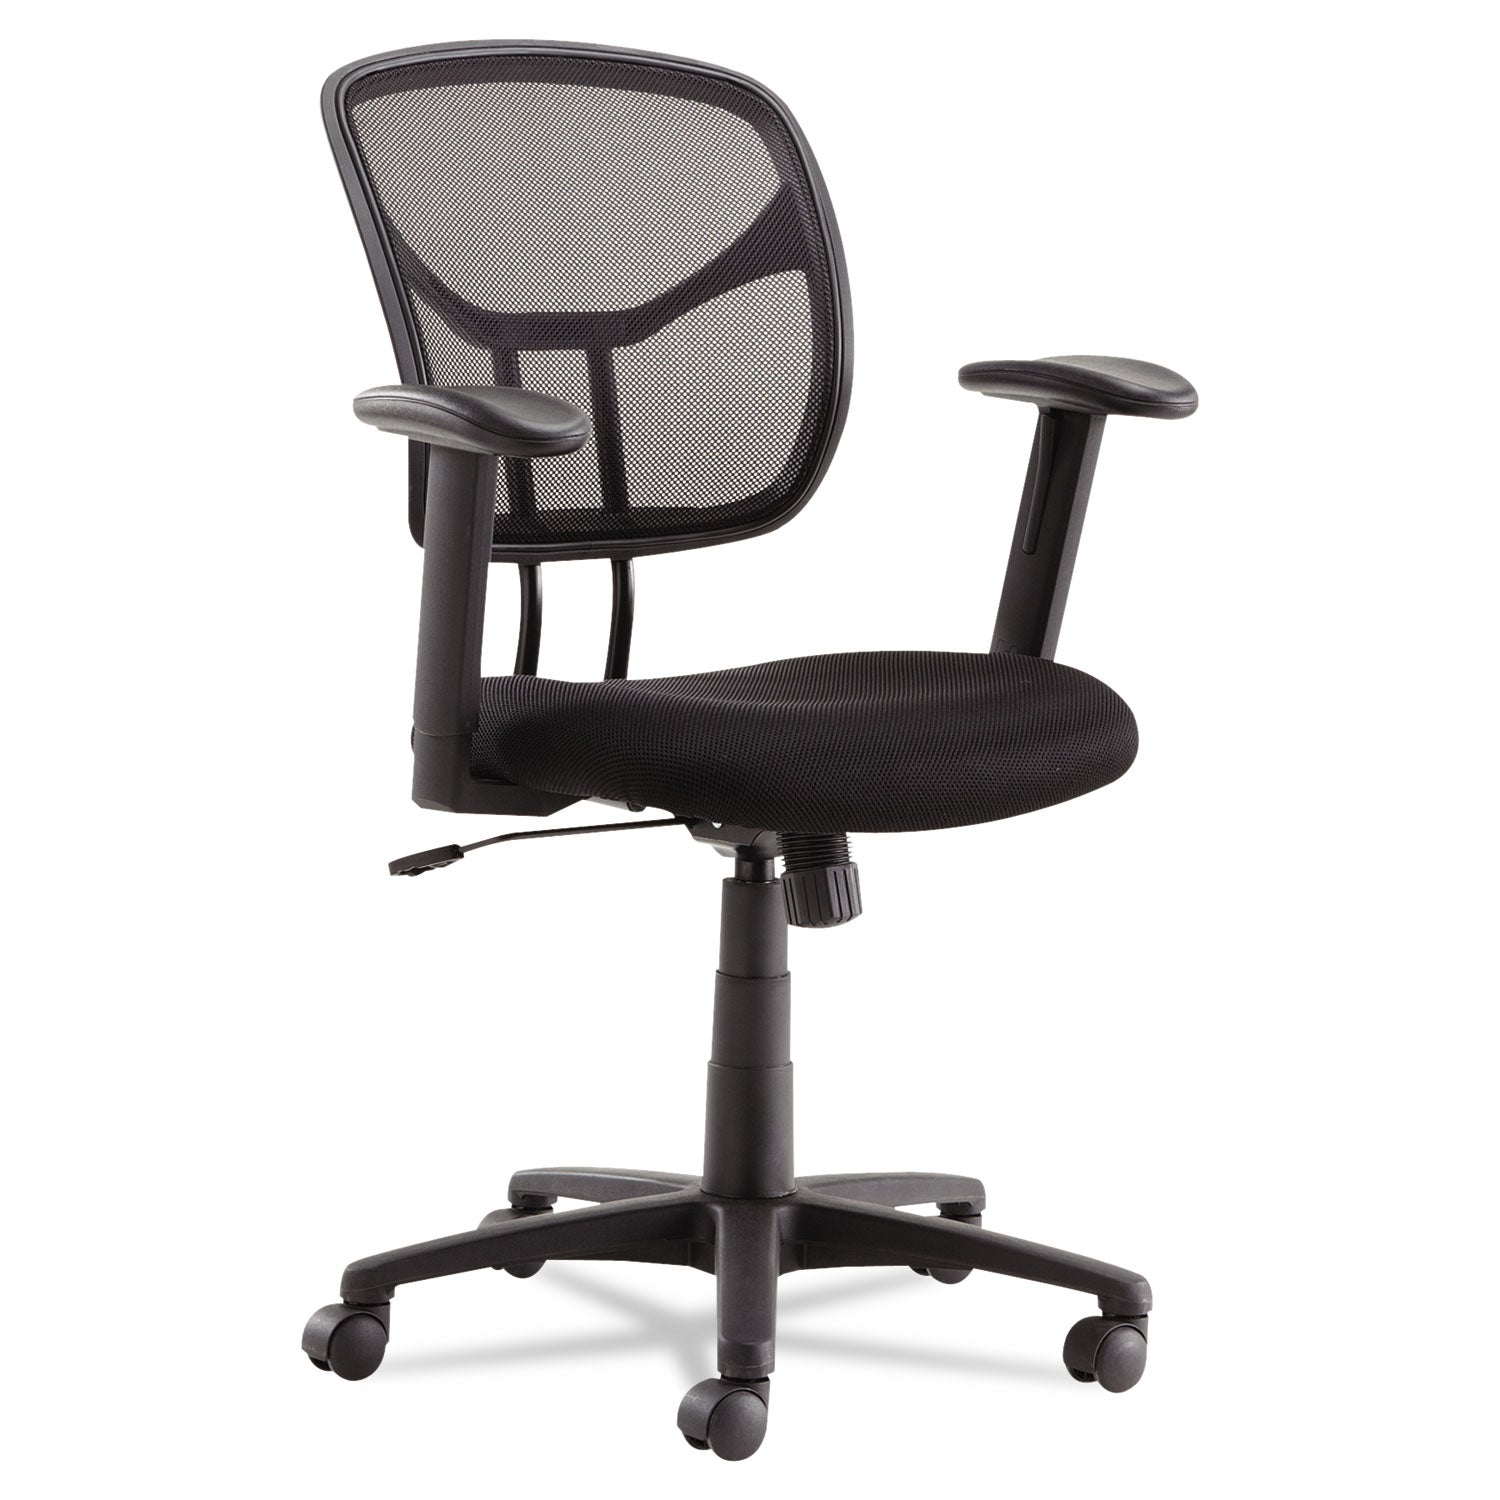 Swivel/Tilt Mesh Task Chair with Adjustable Arms, Supports Up to 250 lb, 17.72" to 22.24" Seat Height, Black - 